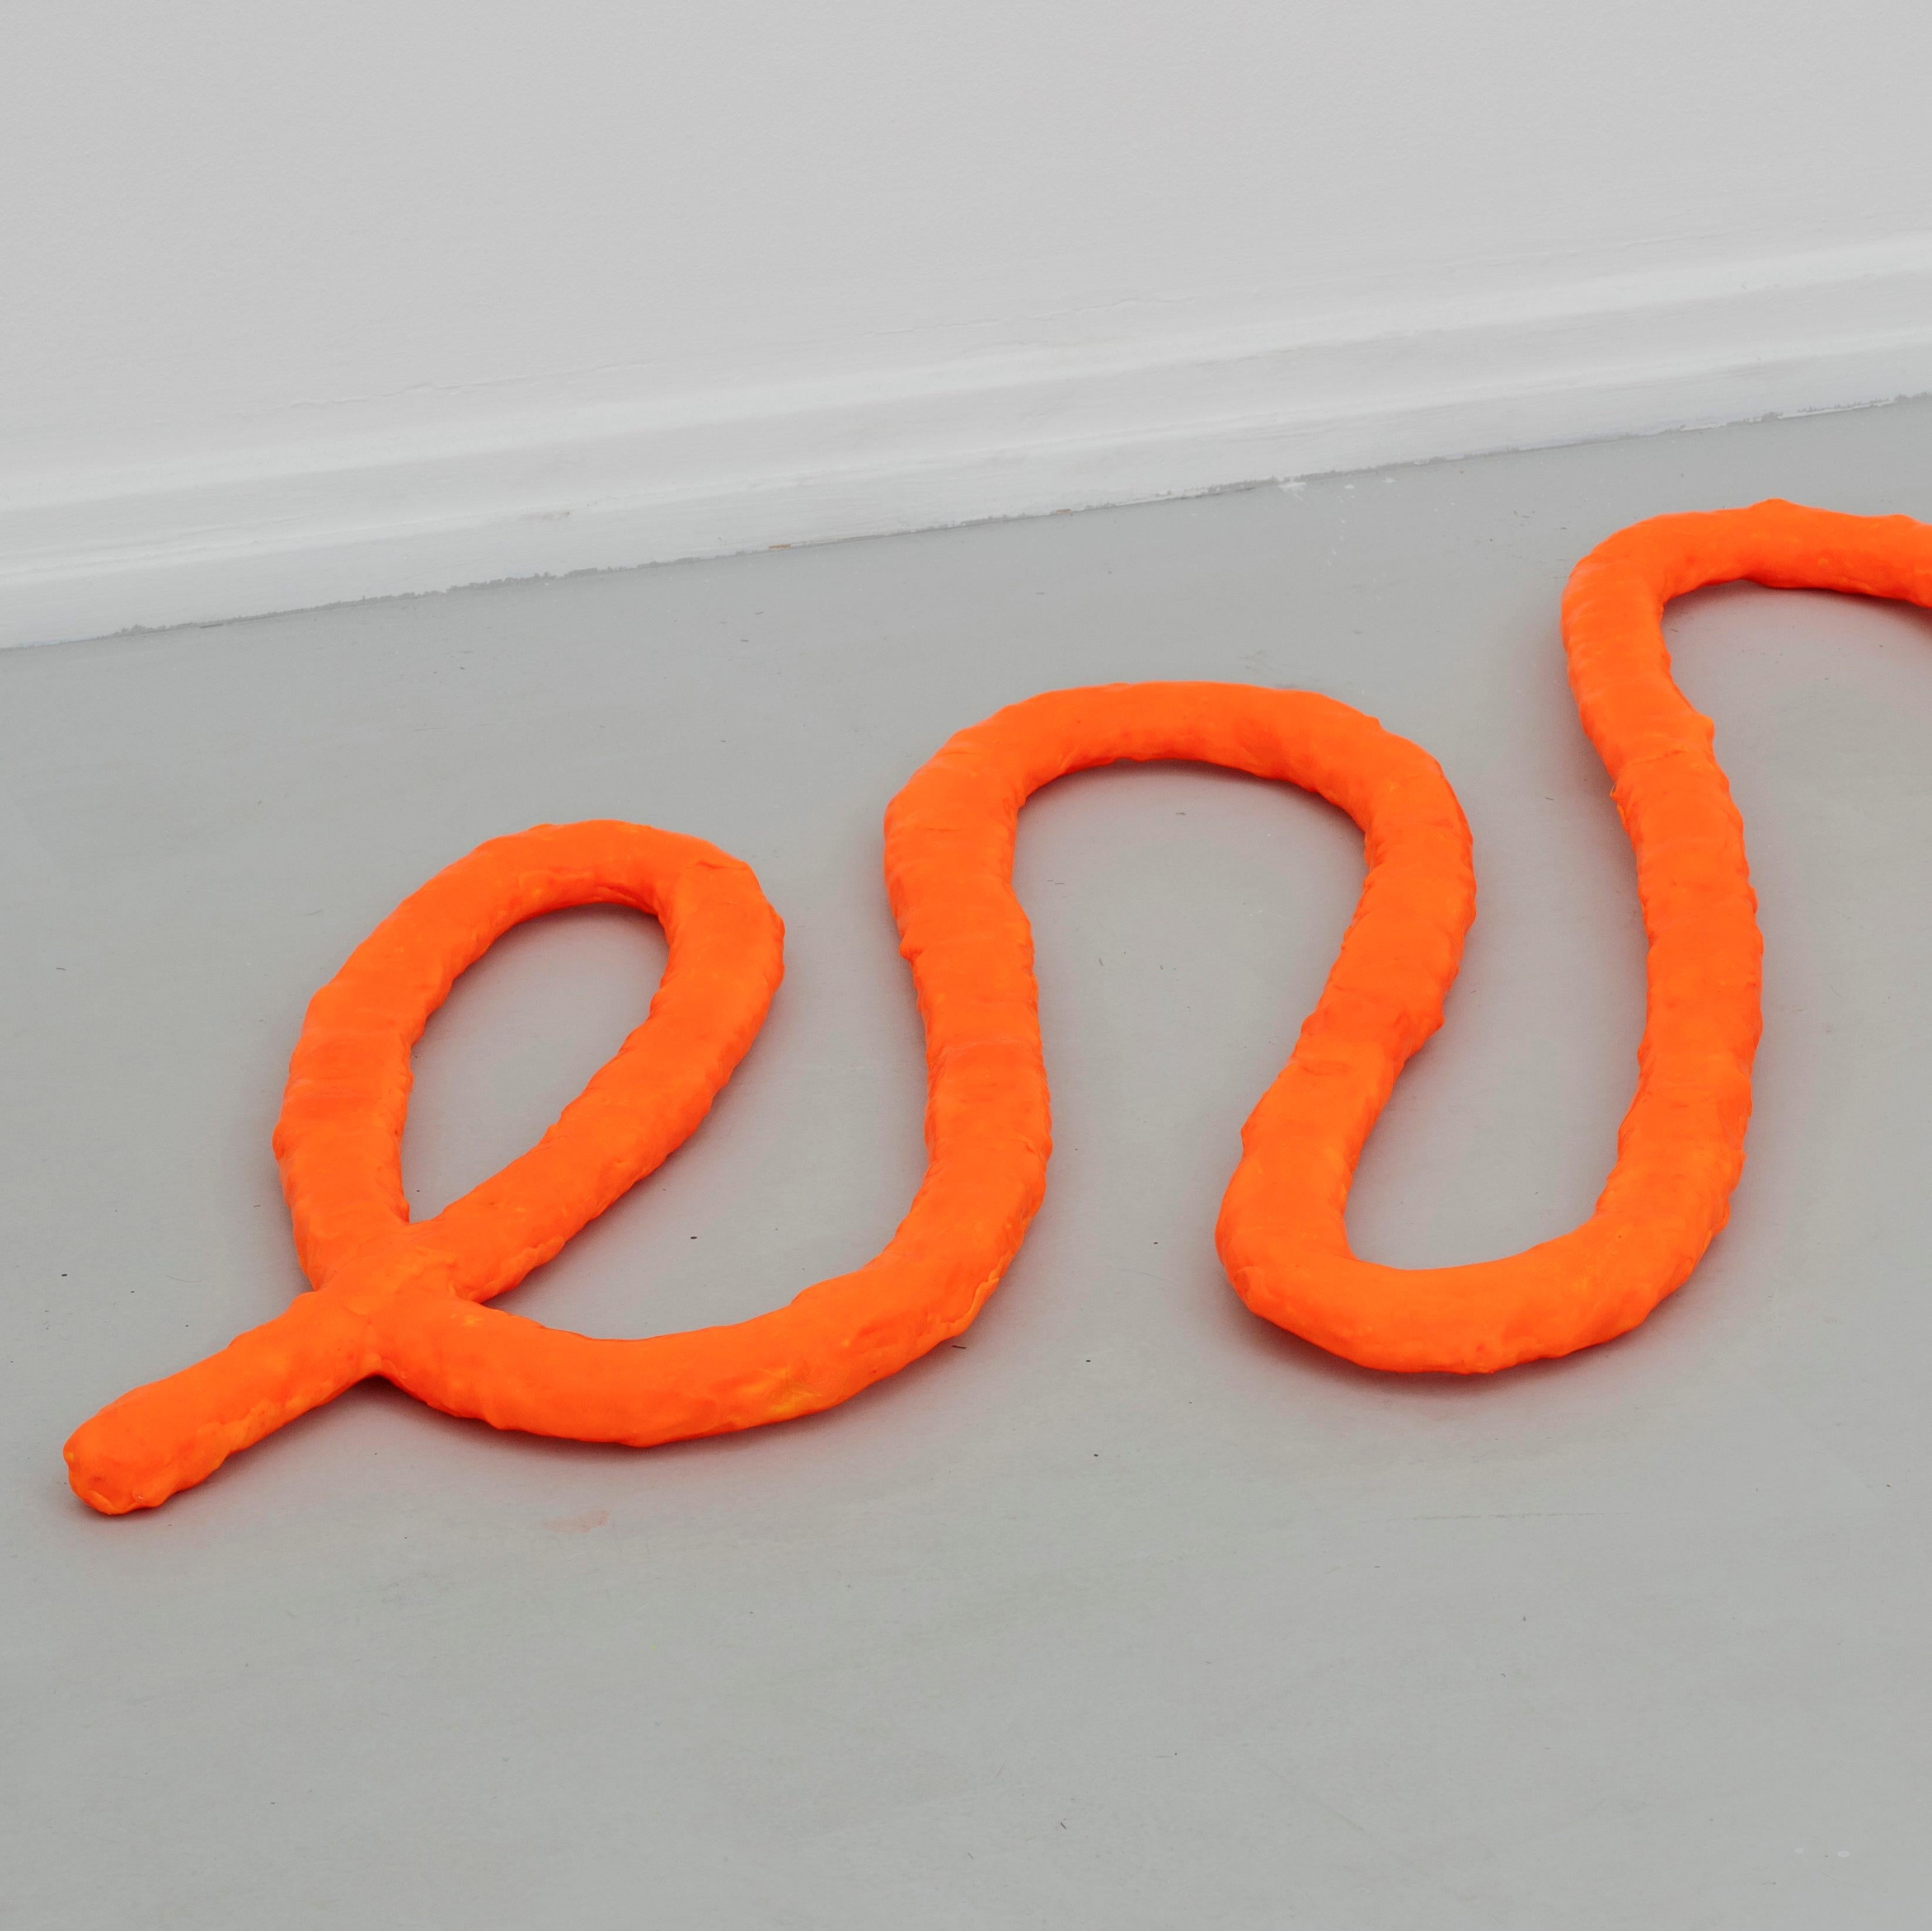 German Contemporary Proto Floor Squiggle Sculpture by Jerszy Seymour